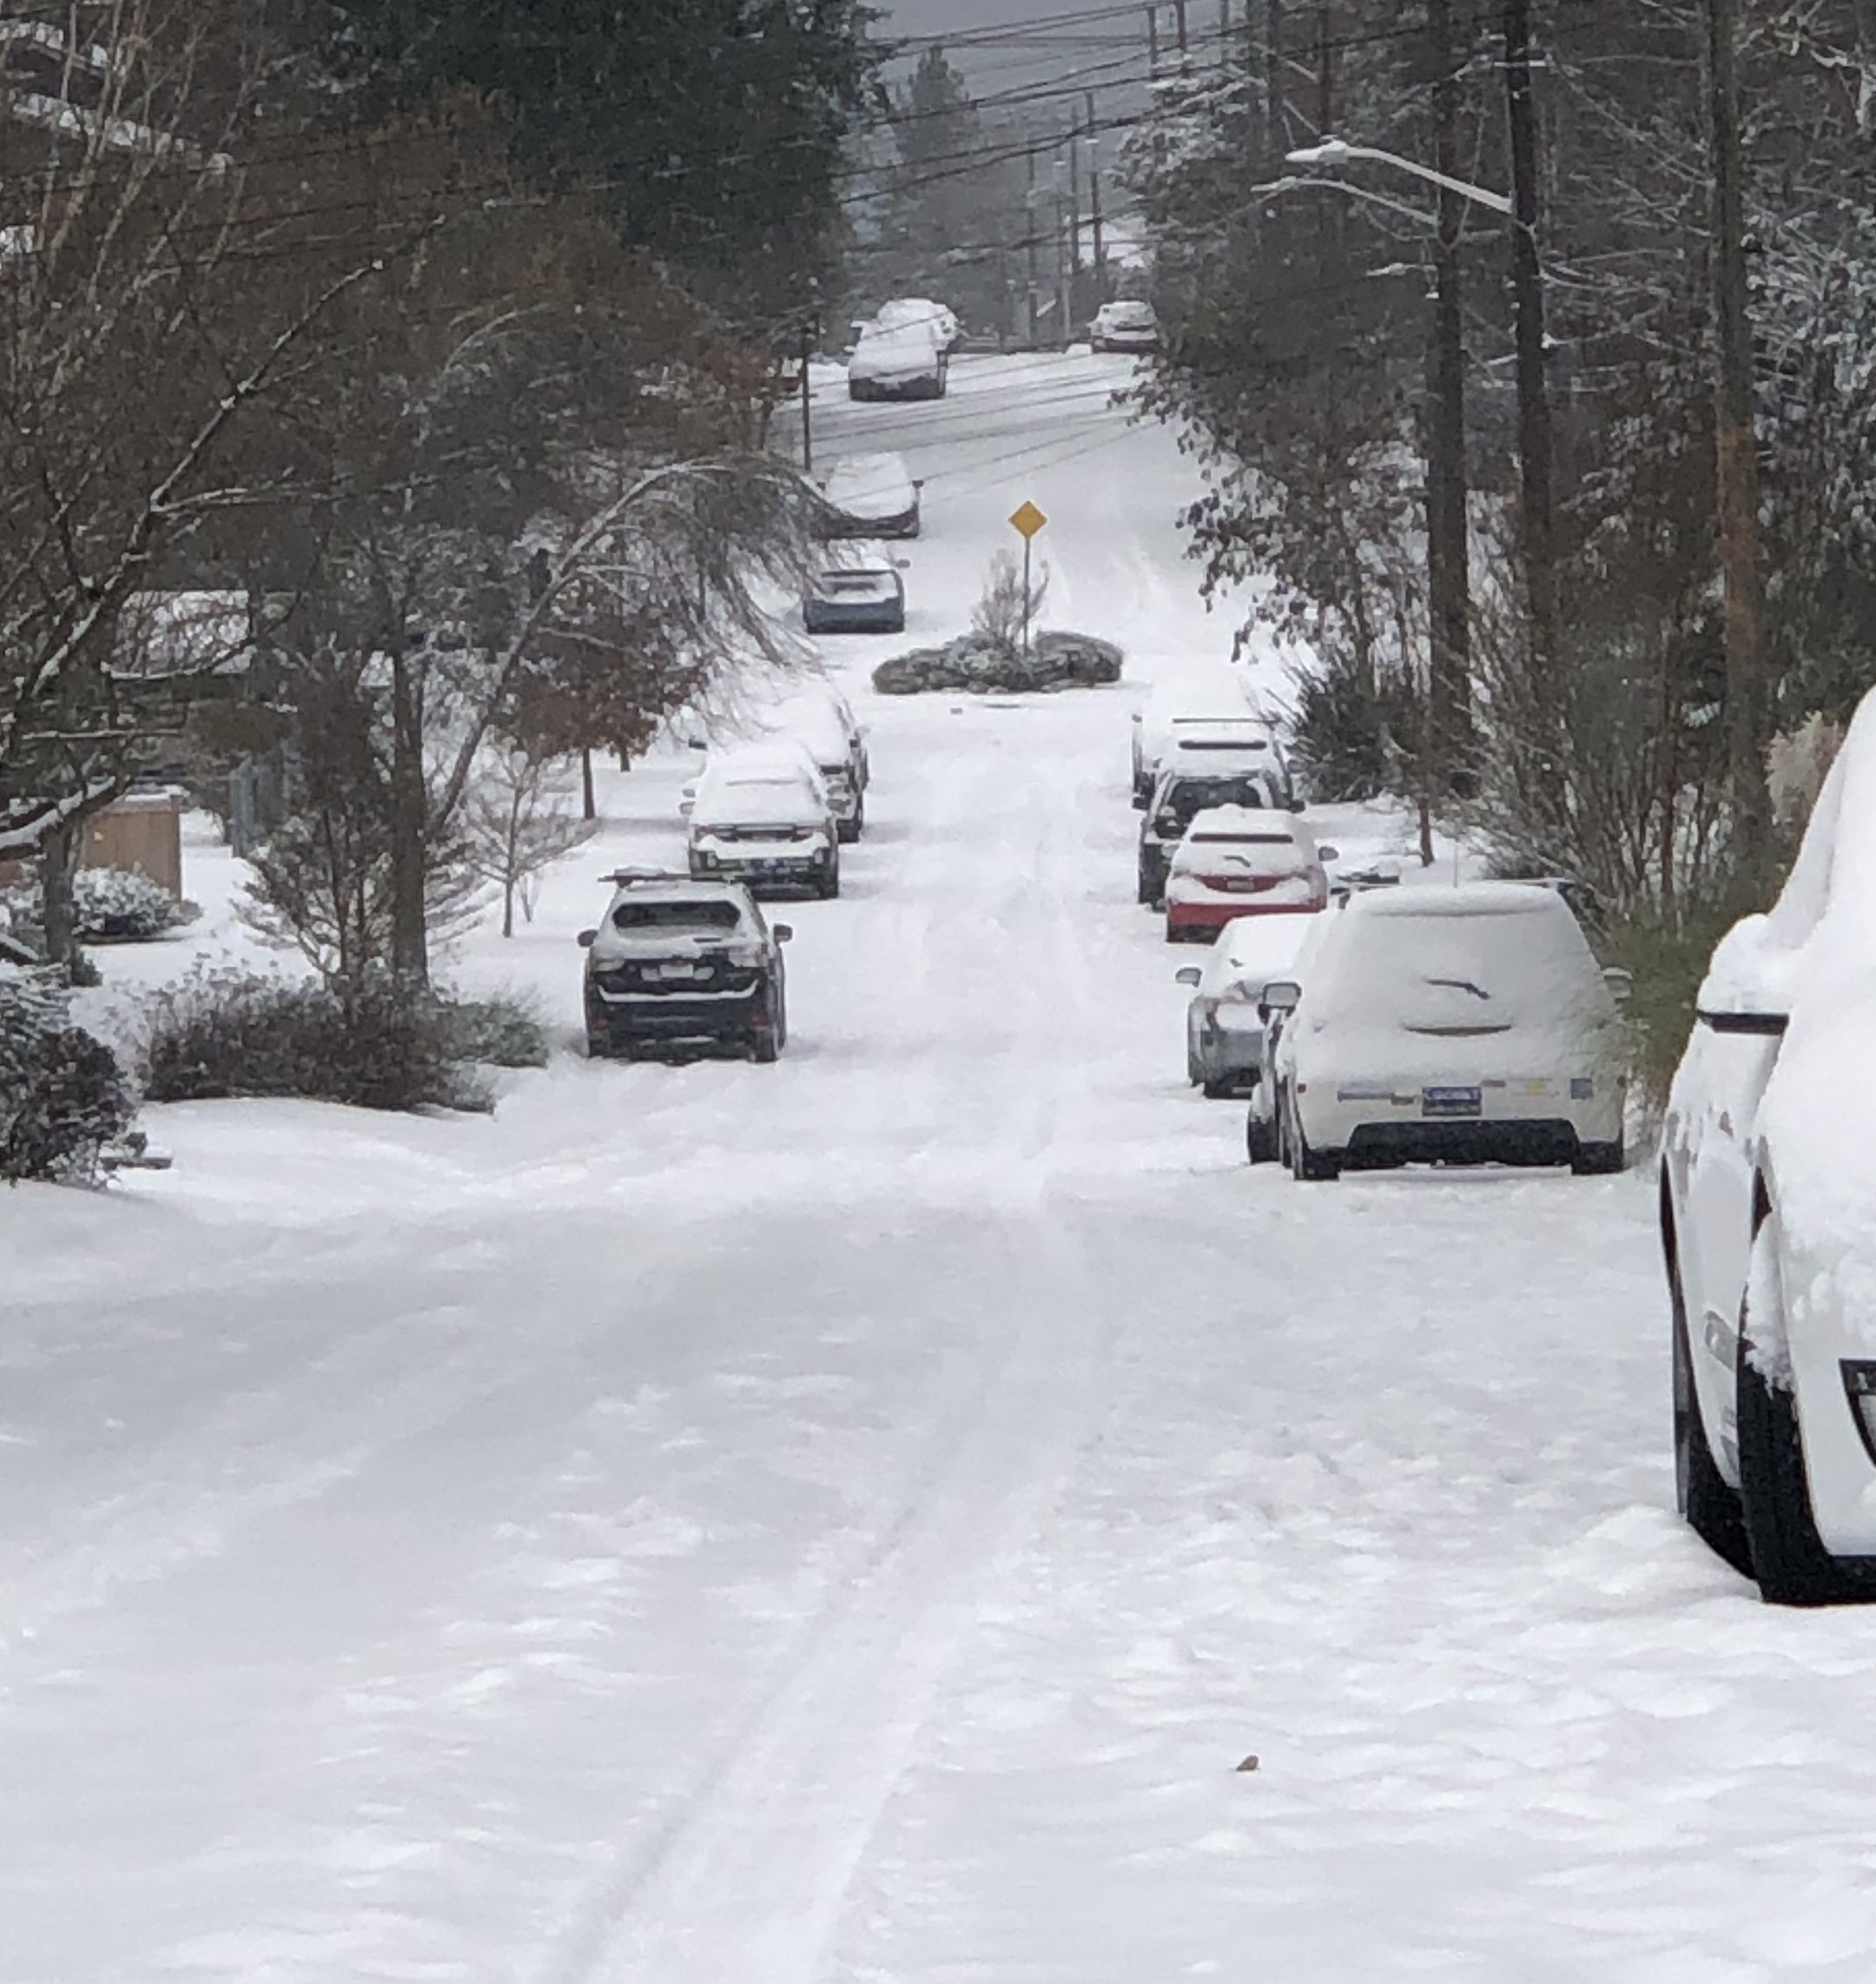 Metro And Others Respond To Frigid Weather Emergency Snow Network Activated Westside Seattle